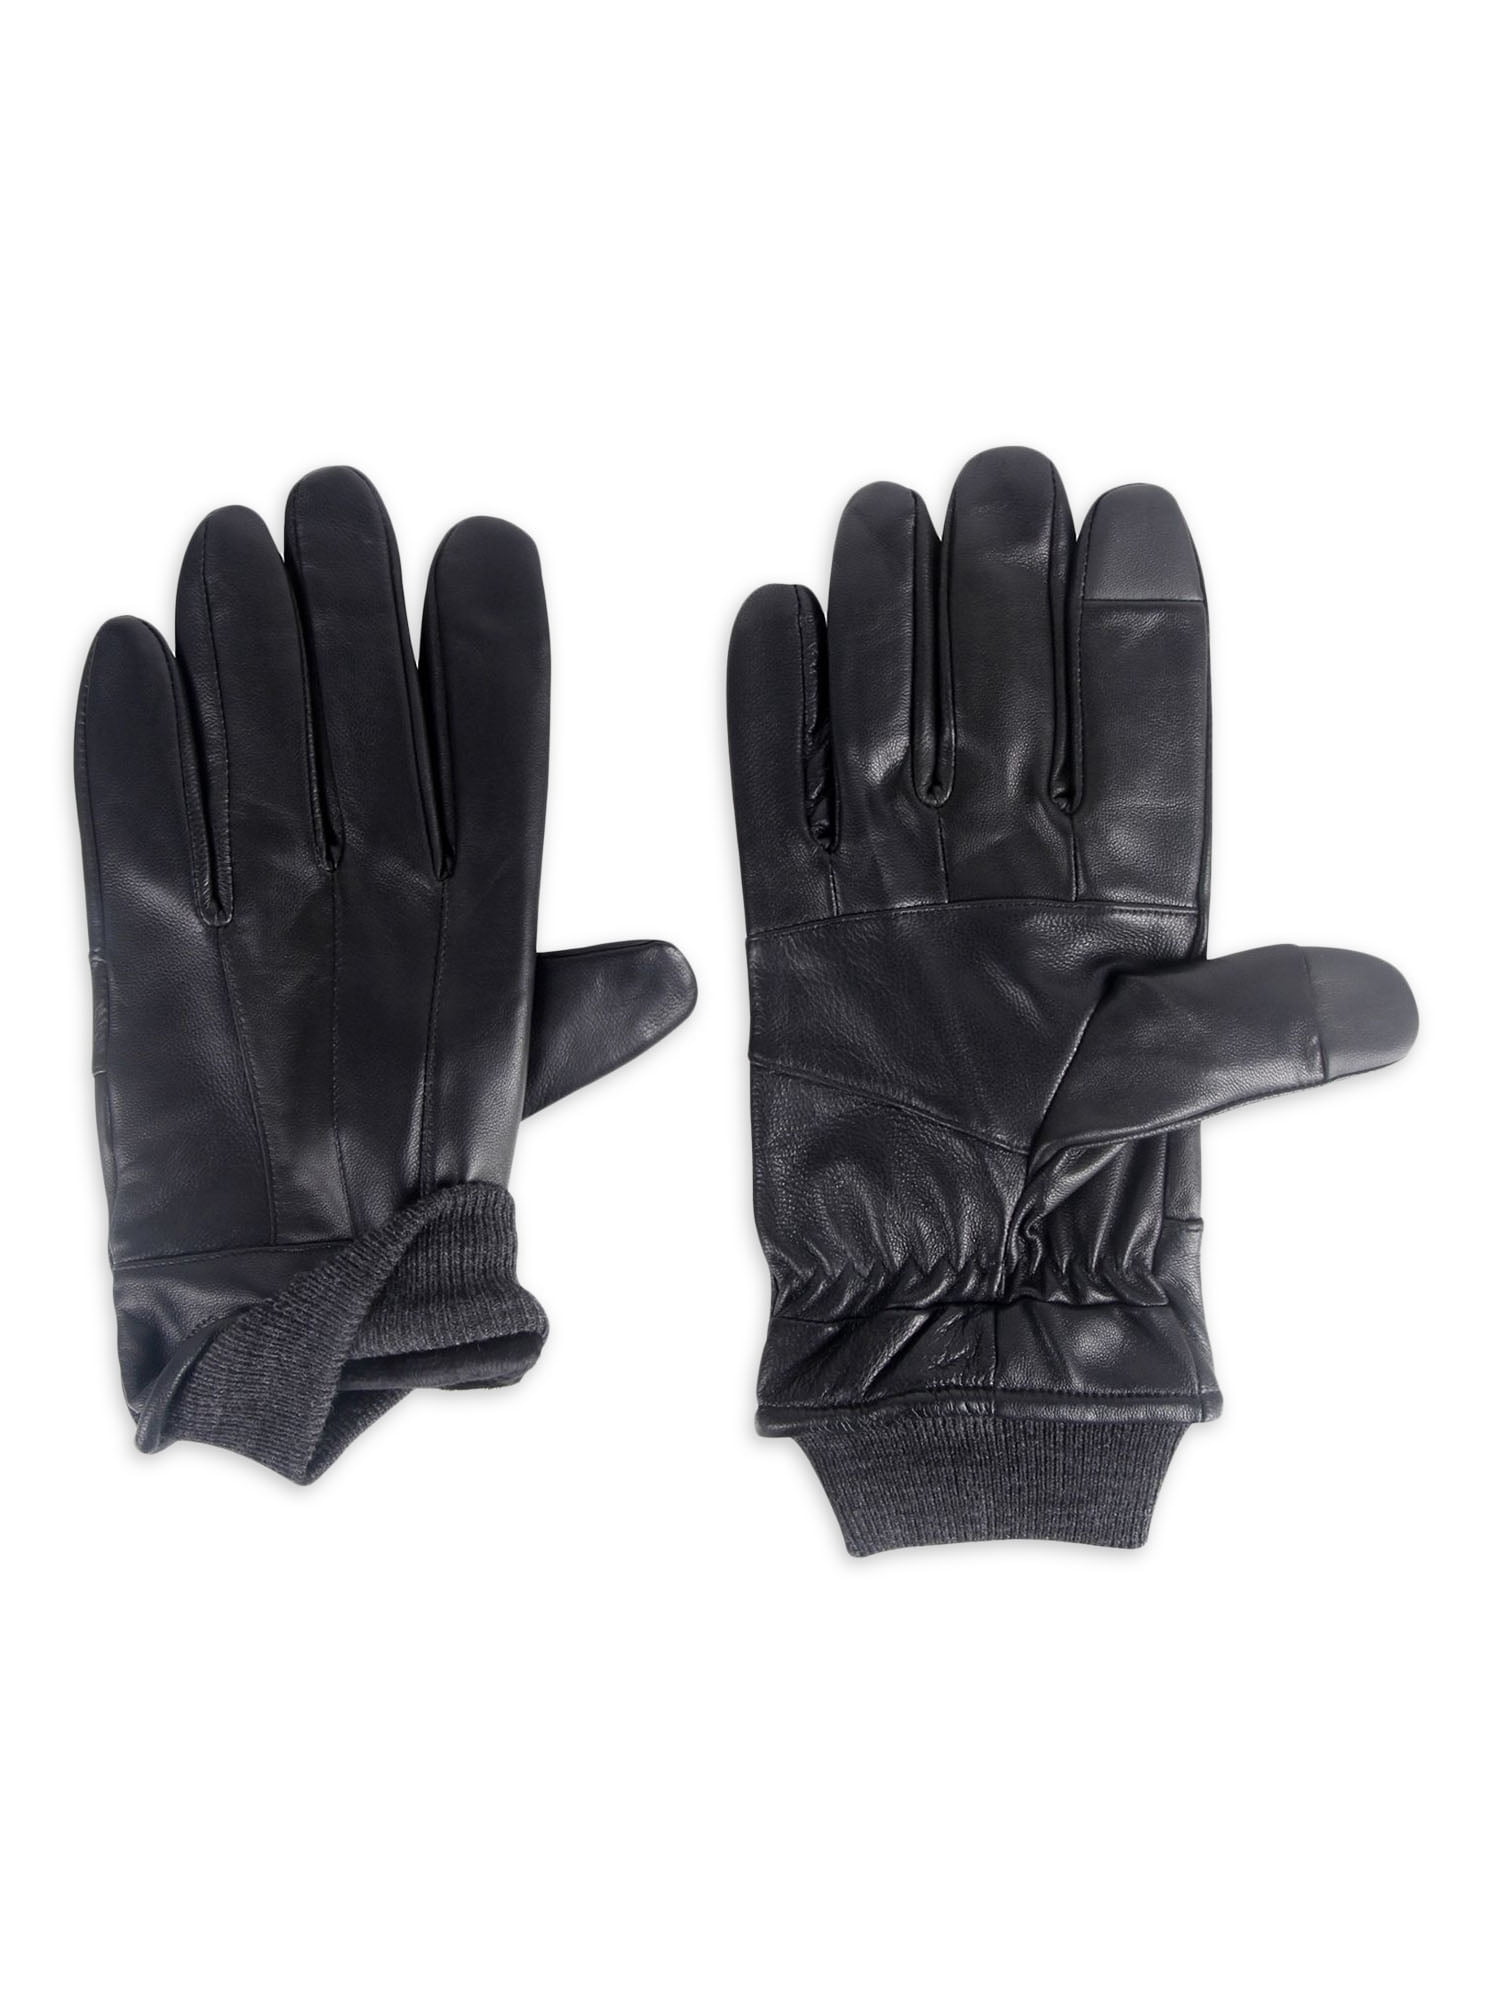 Dockers Mens Black Leather Gloves Fleece & Thinsulate Lined 